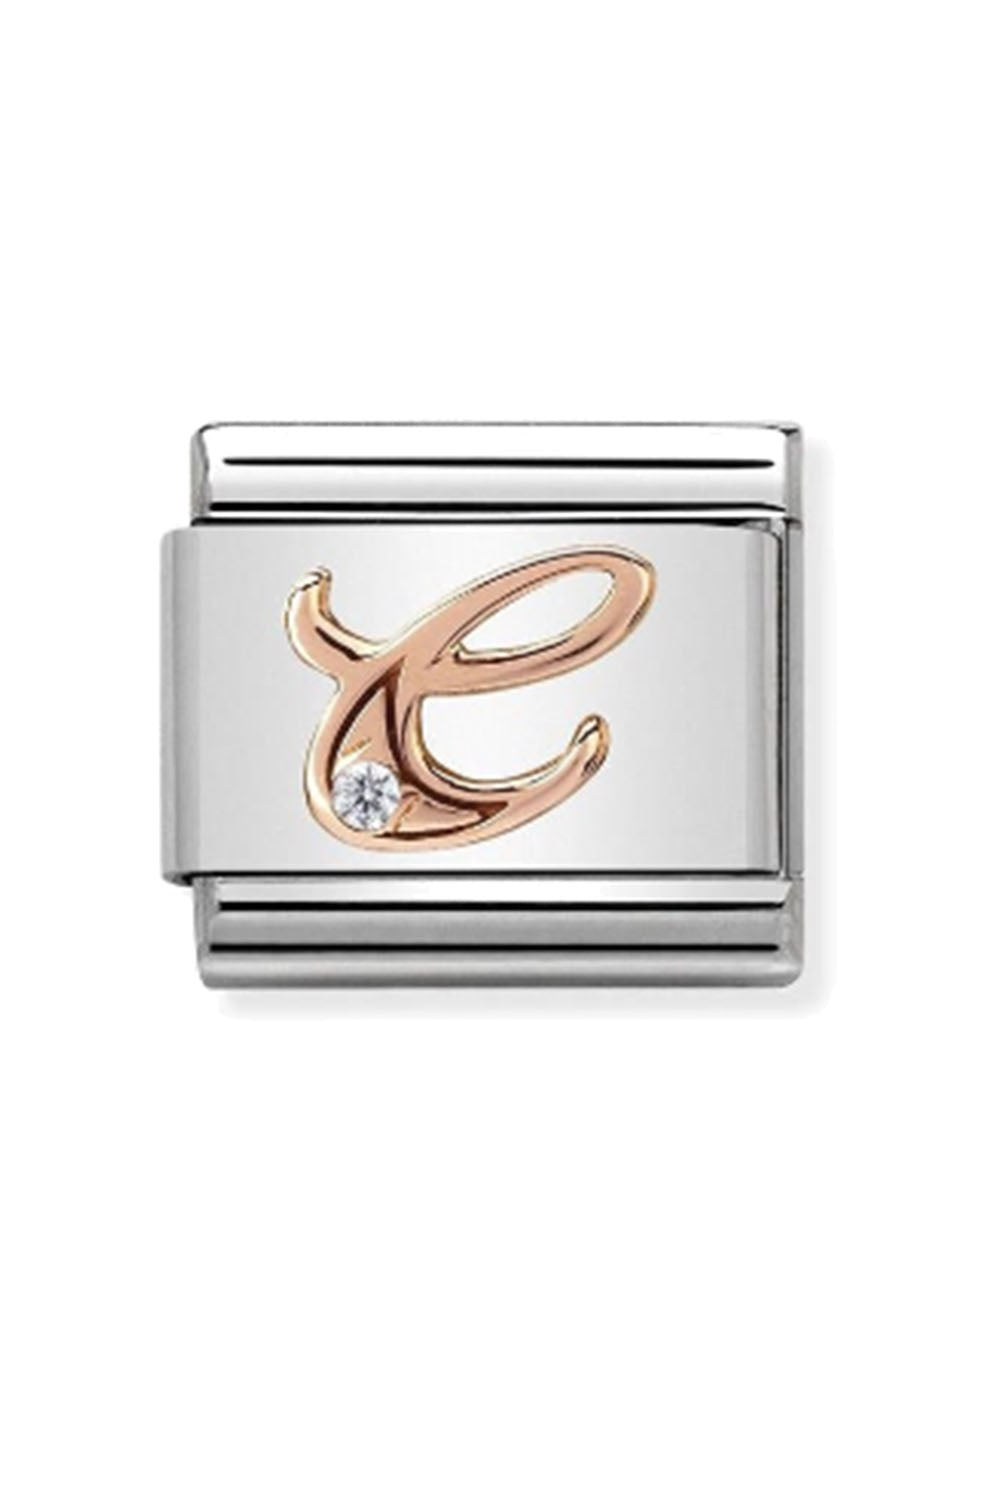 LETTERS 9k rose gold and CZ C